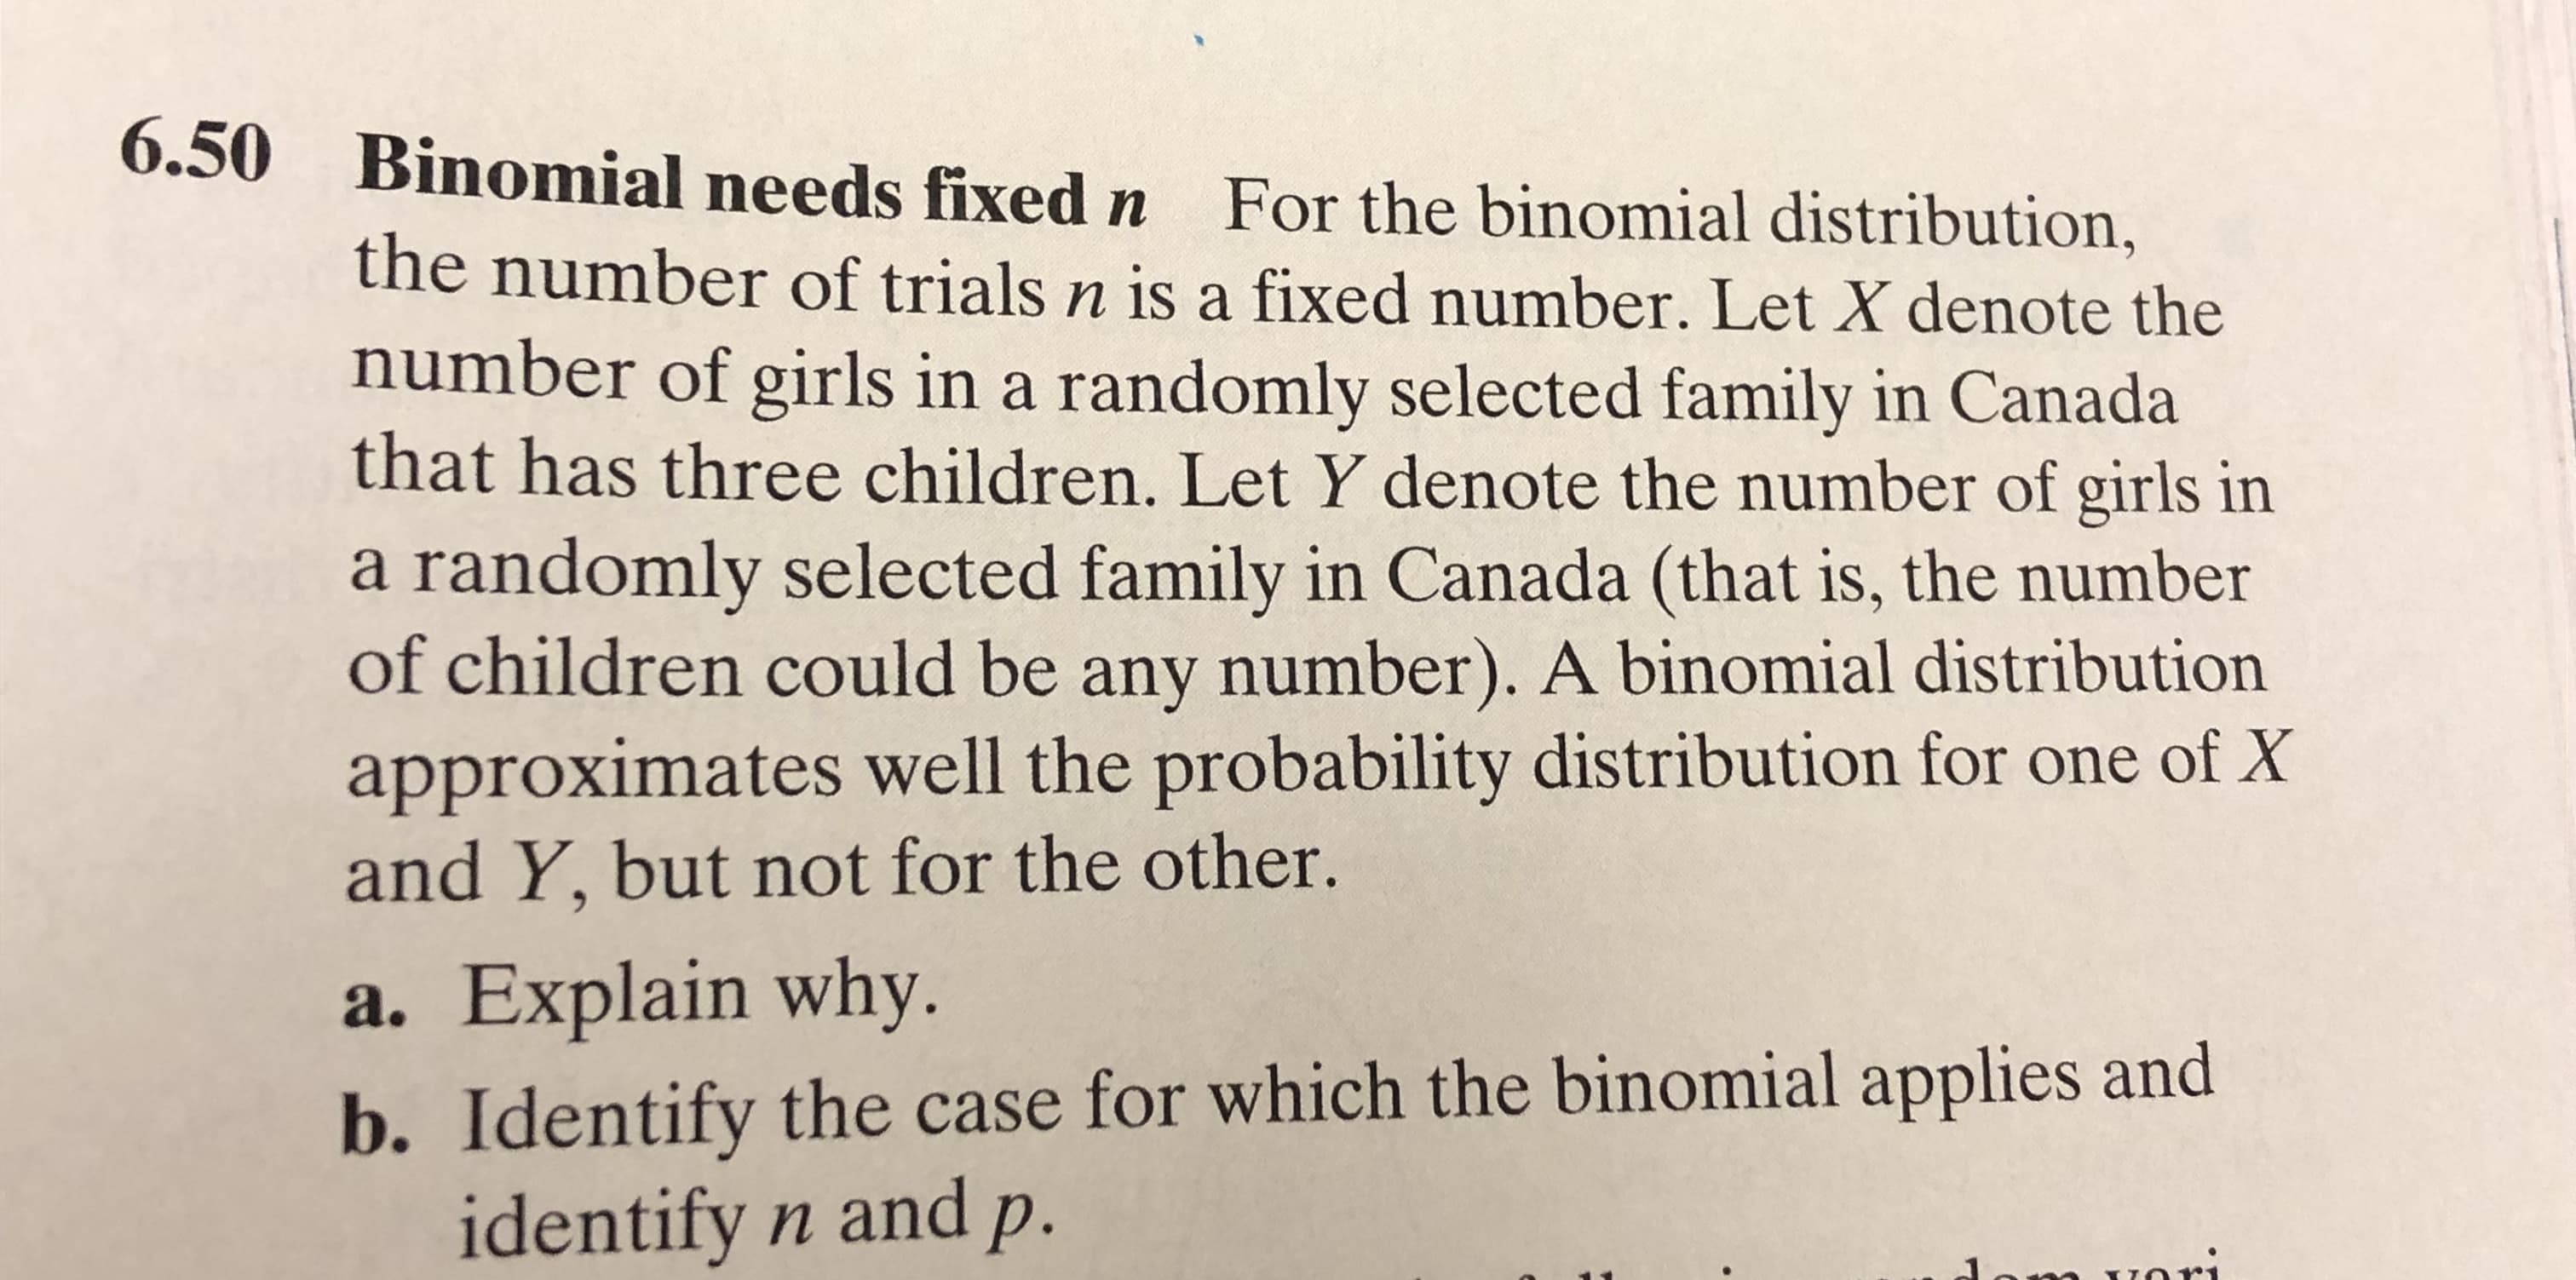 6.50
Binomial needs fixed n
For the binomial distribution,
the number of trials n is a fixed number. Let X denote the
number of girls in a randomly selected family in Canada
that has three children. Let Y denote the number of girls in
a randomly selected family in Canada (that is, the number
of children could be any number). A binomial distribution
approximates well the probability distribution for one of X
and Y, but not for the other.
a. Explain why
b. Identify the case for which the binomial applies and
identify n andp.
m vori
